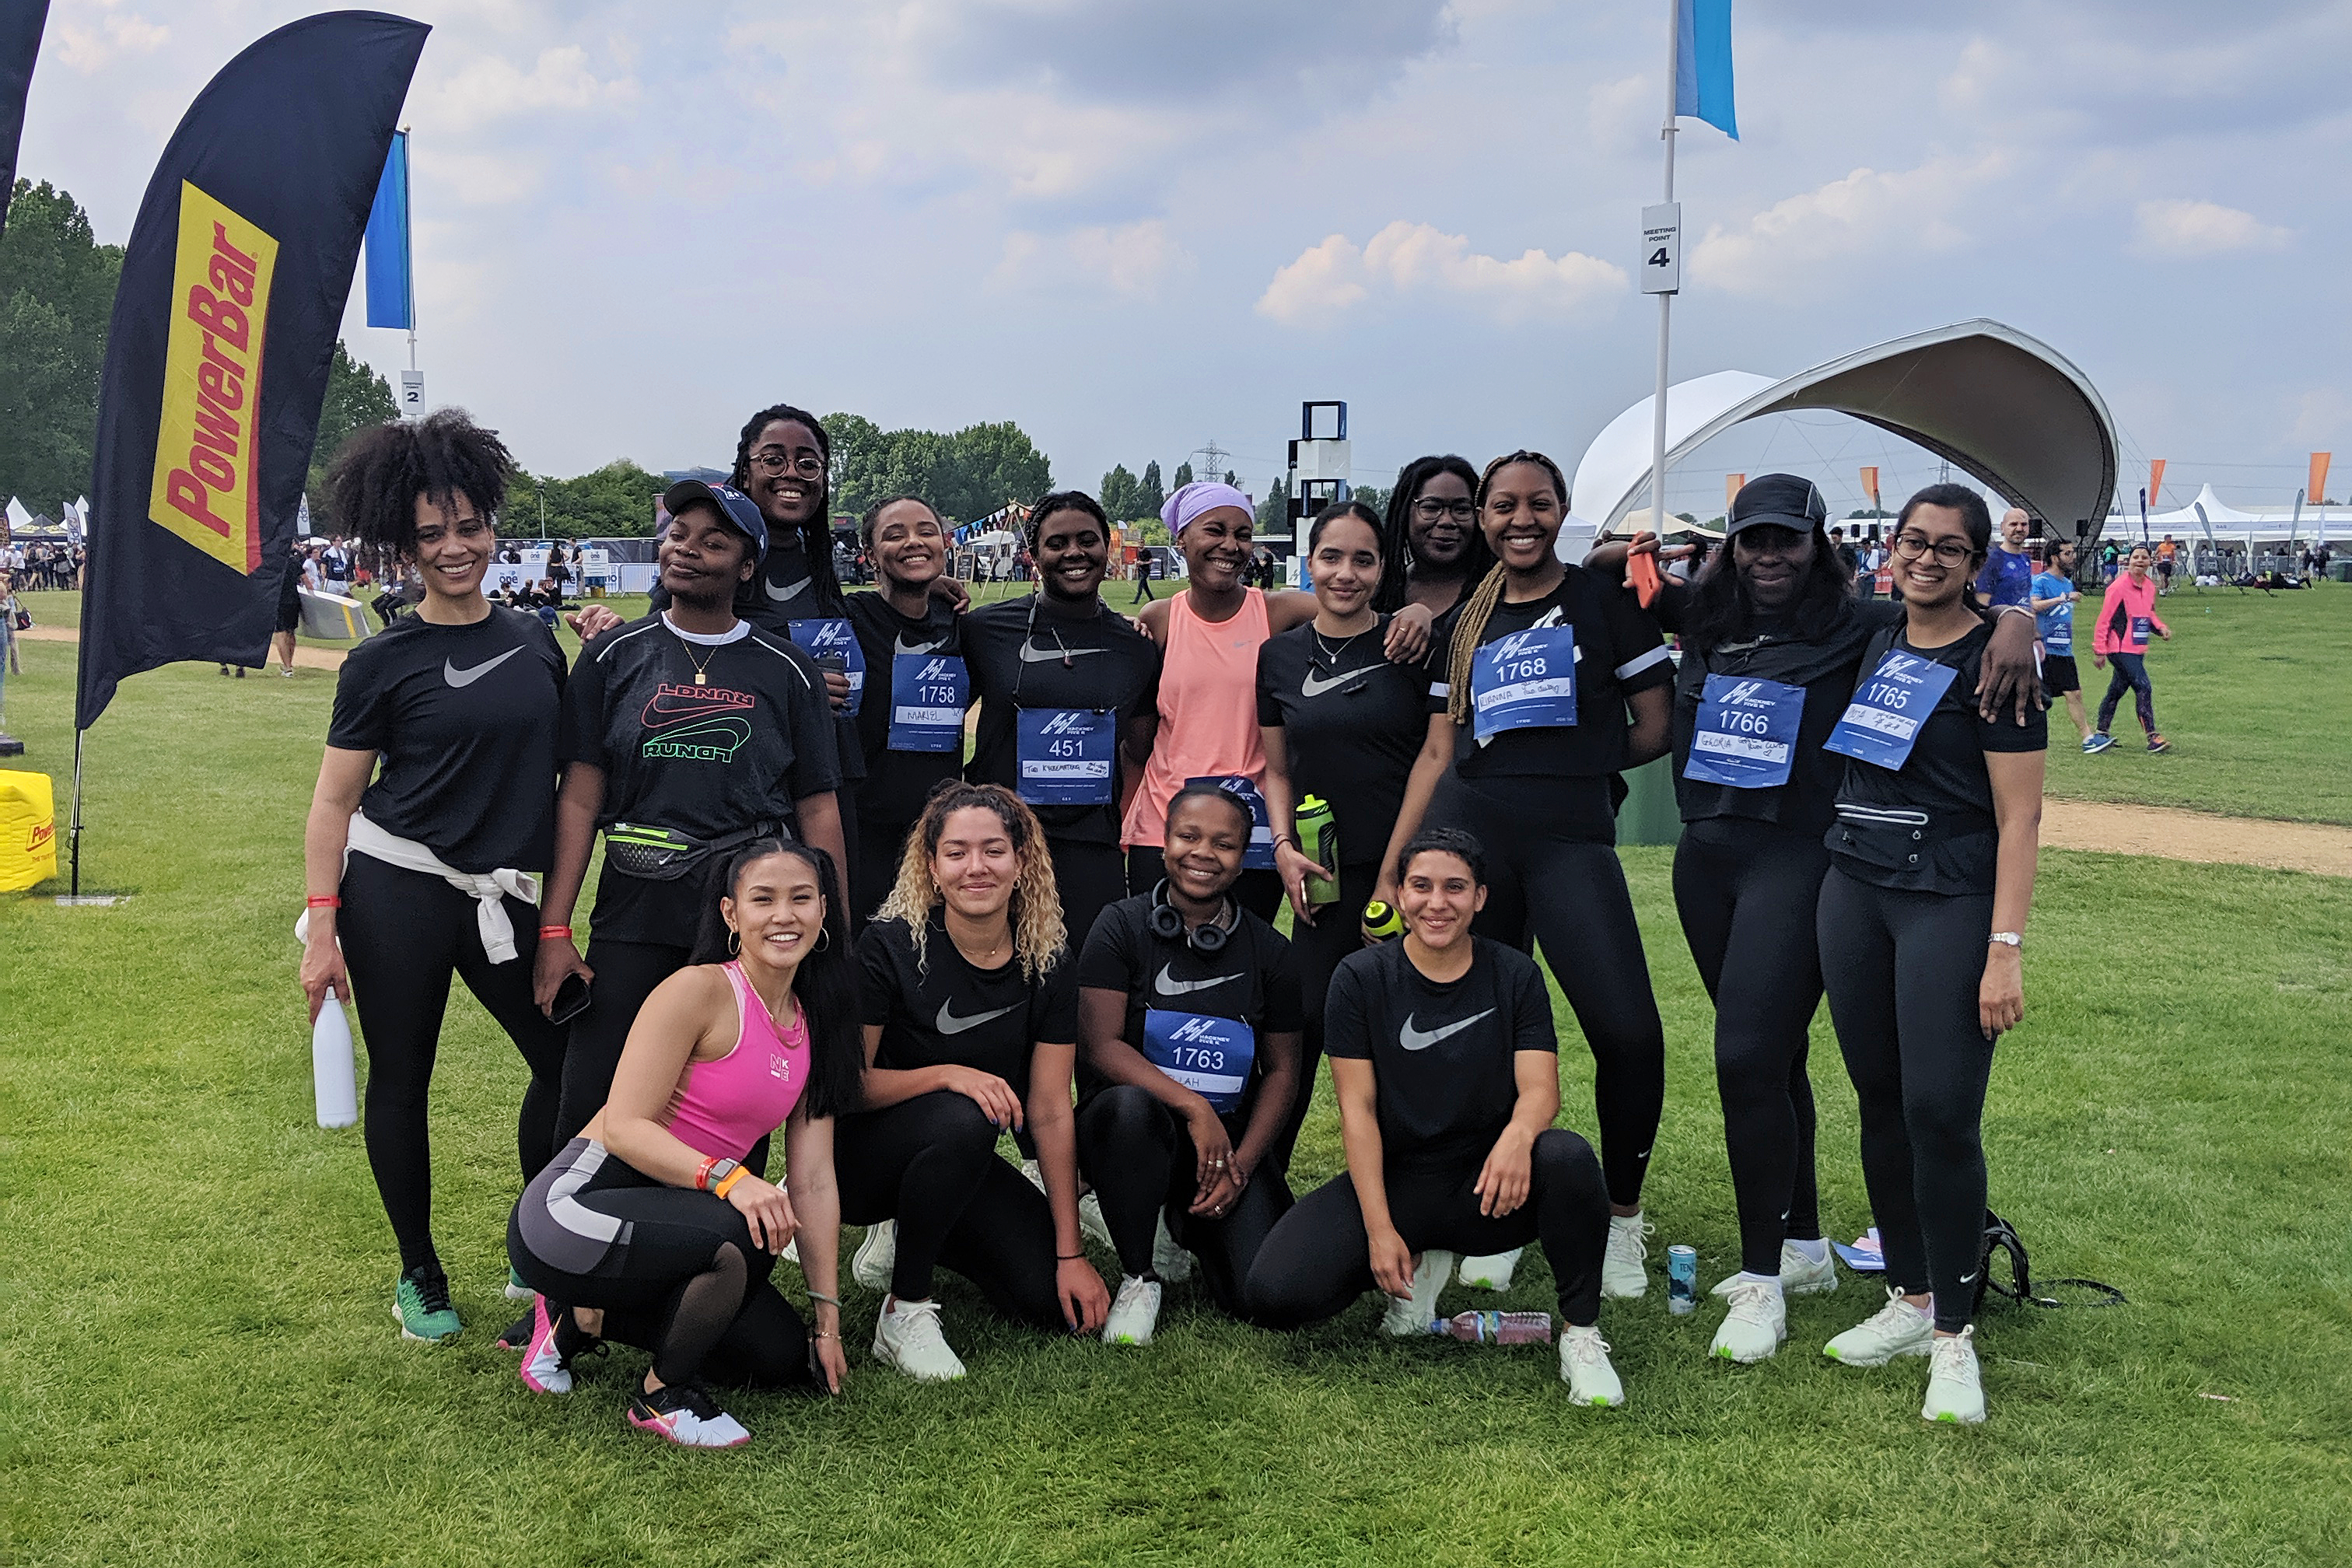 gal-dem started a run club, and this is how it went﻿